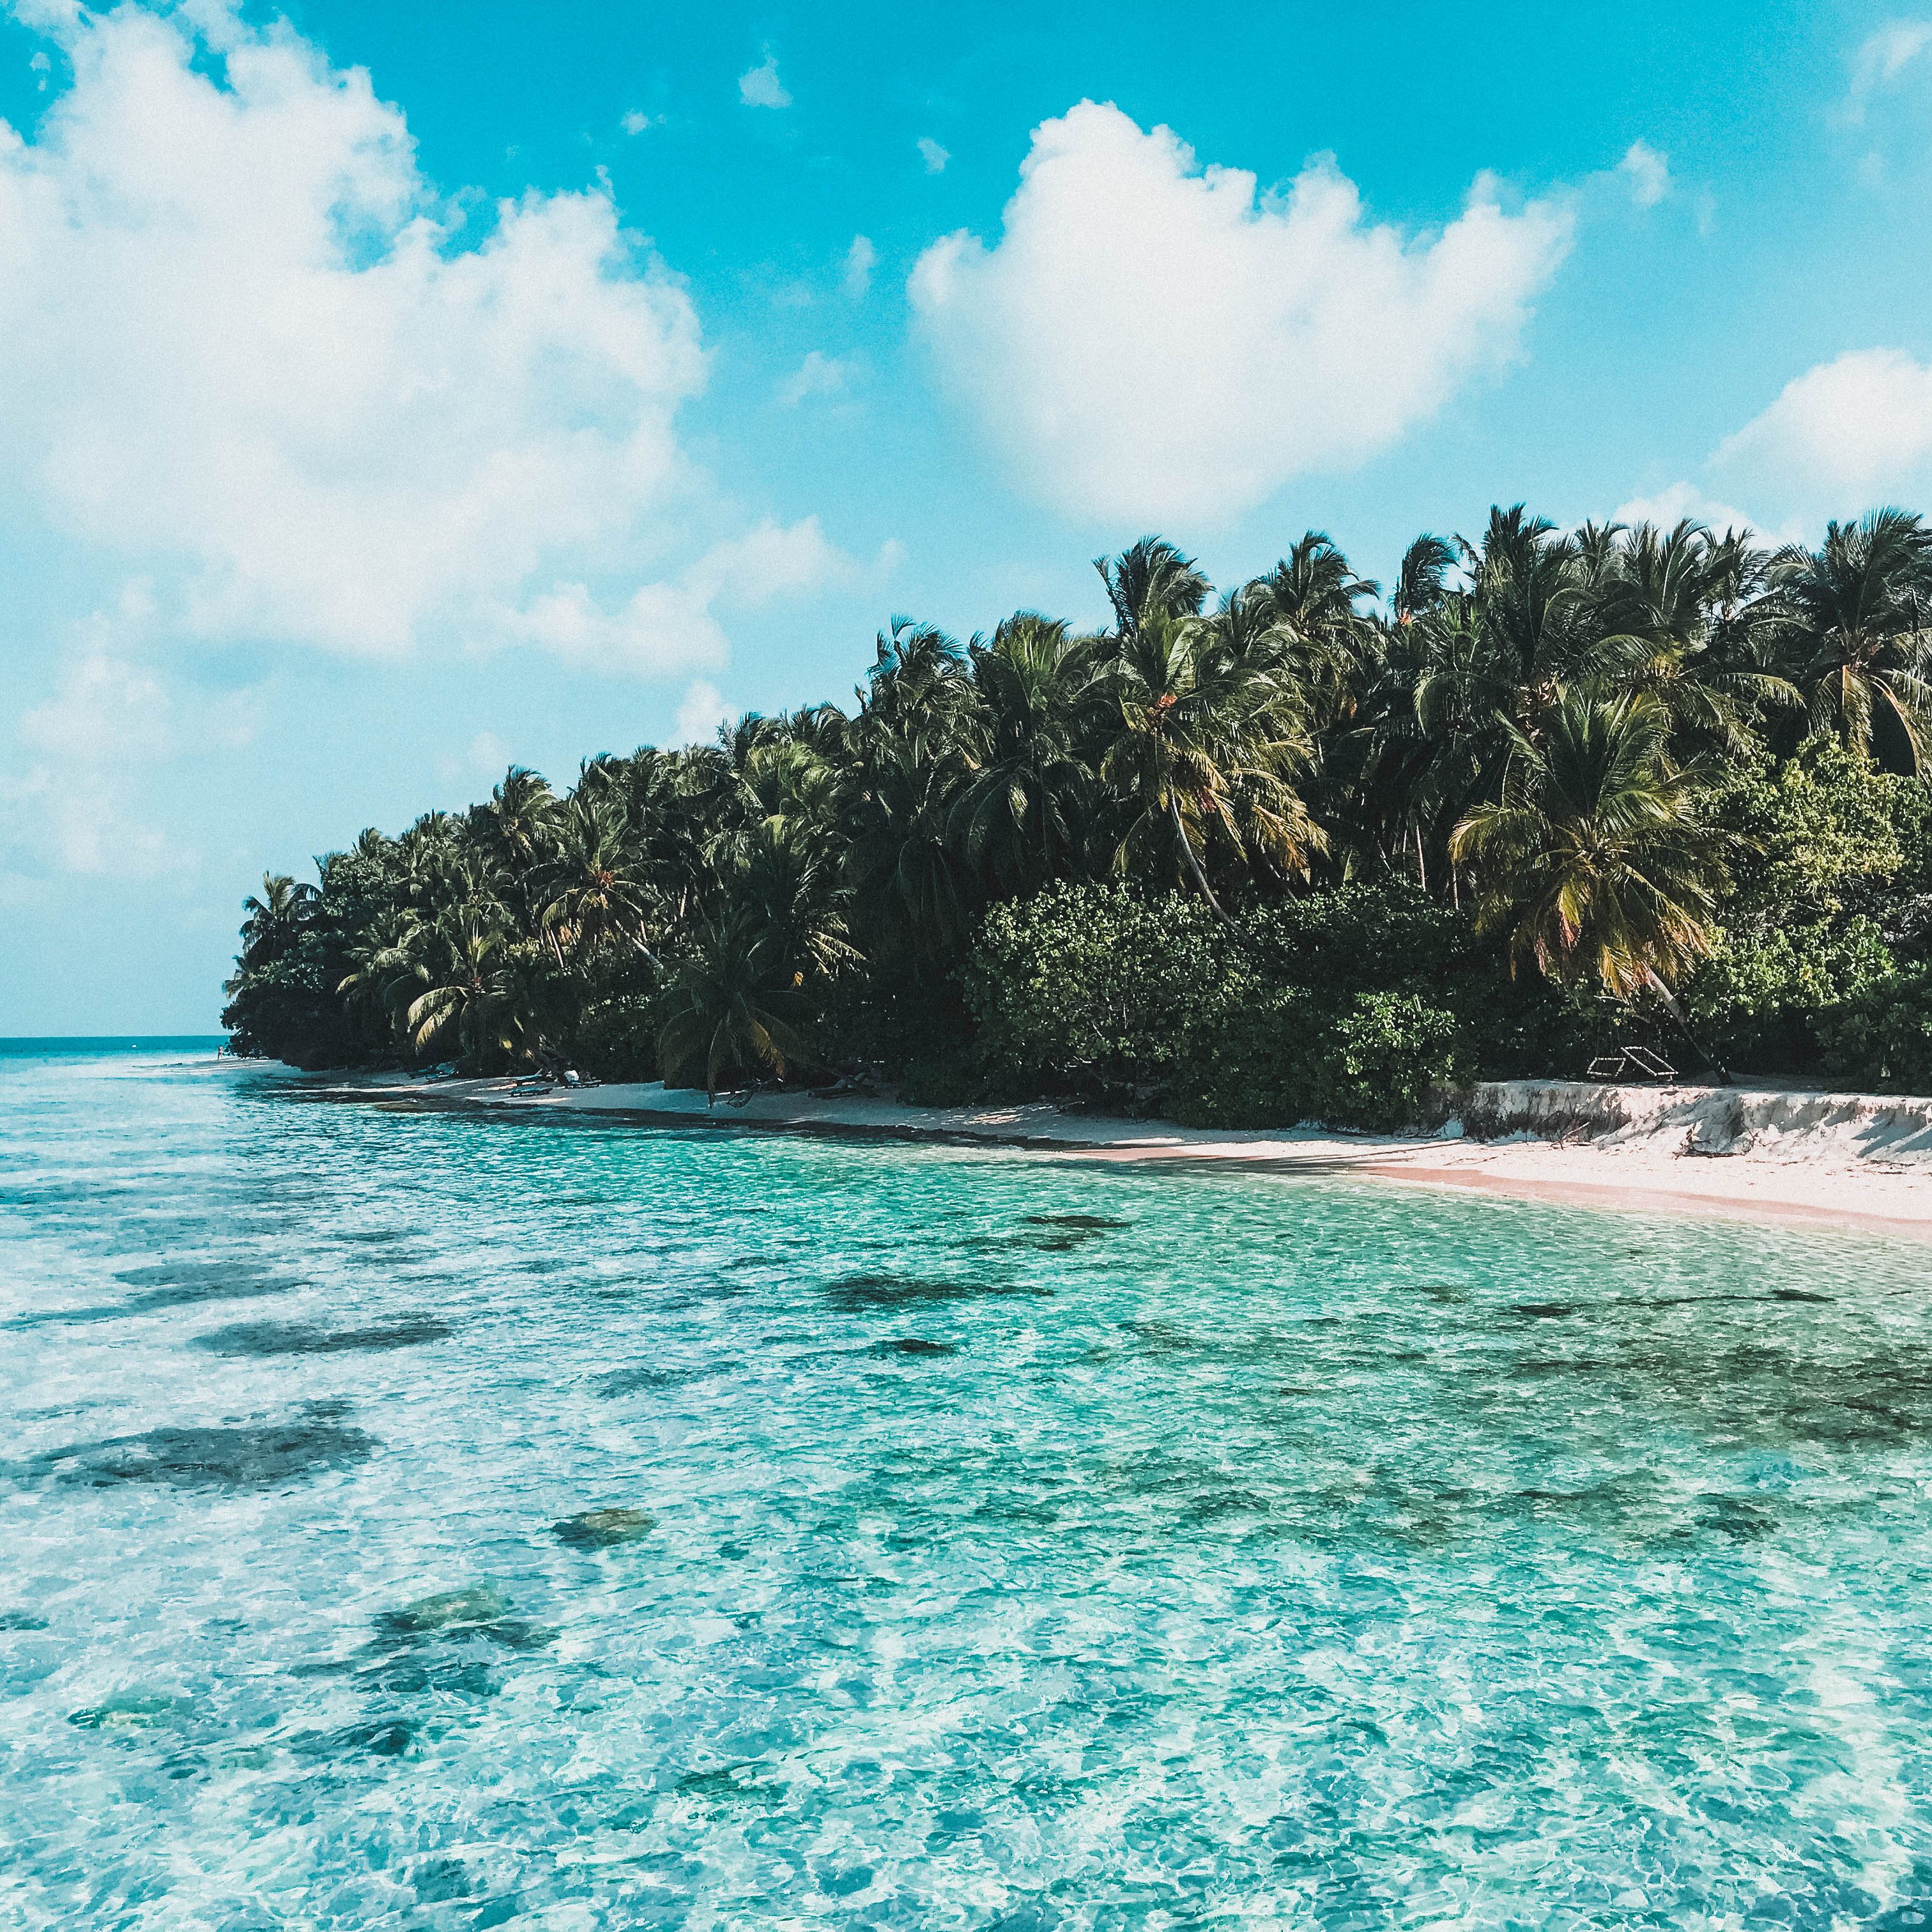 01032020: #MALDIVES TRAVEL DIARY 2019 | PART TWO: A DAY IN THE MALDIVES